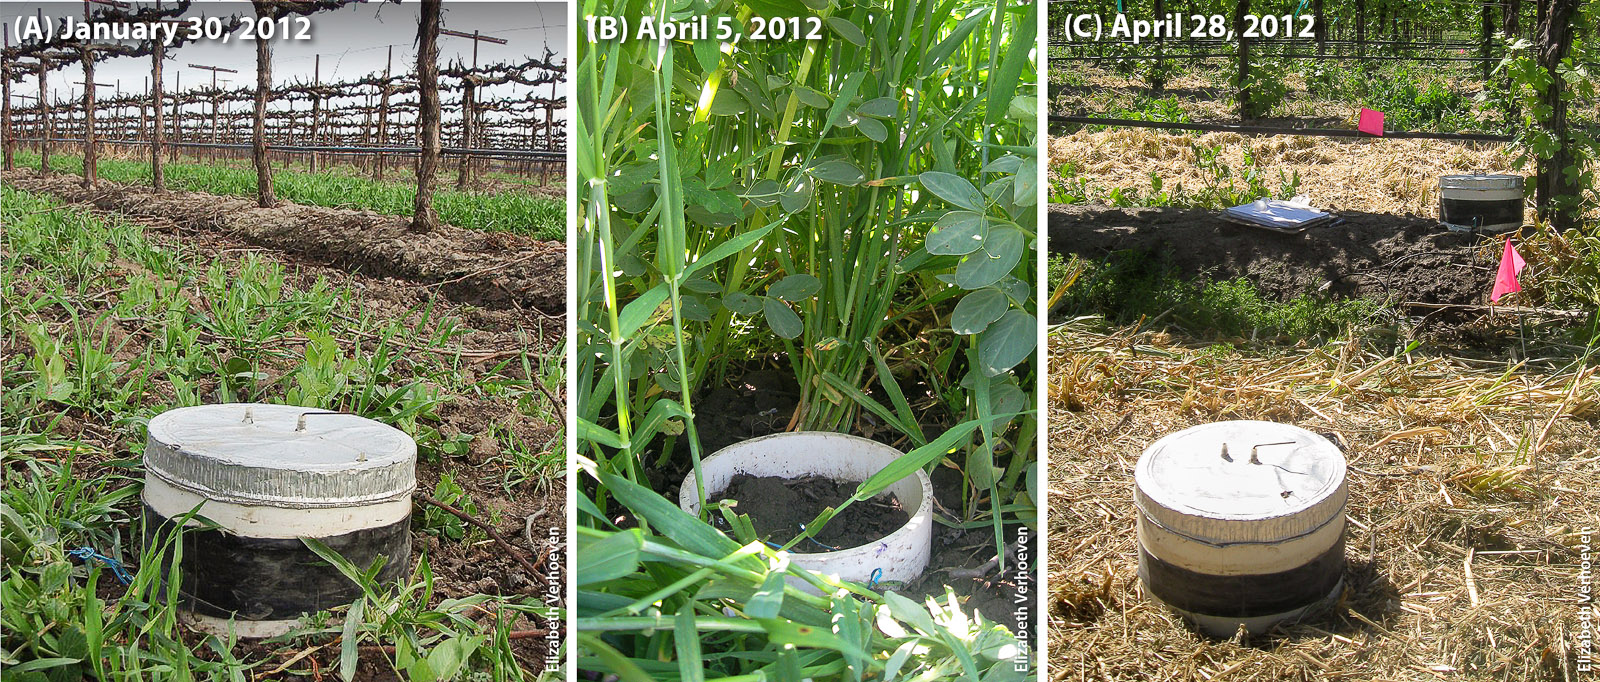 Photos show gas flux chambers and vegetation growth in the tractor row of a vineyard (A) early in cover crop growth, (B) at peak growth and (C) after mowing (with vine row in background). The images illustrate the dramatic differences in vegetation between functional locations and at different points in the year, and thus the need for field measurements of N2O emissions across functional locations and throughout the year.